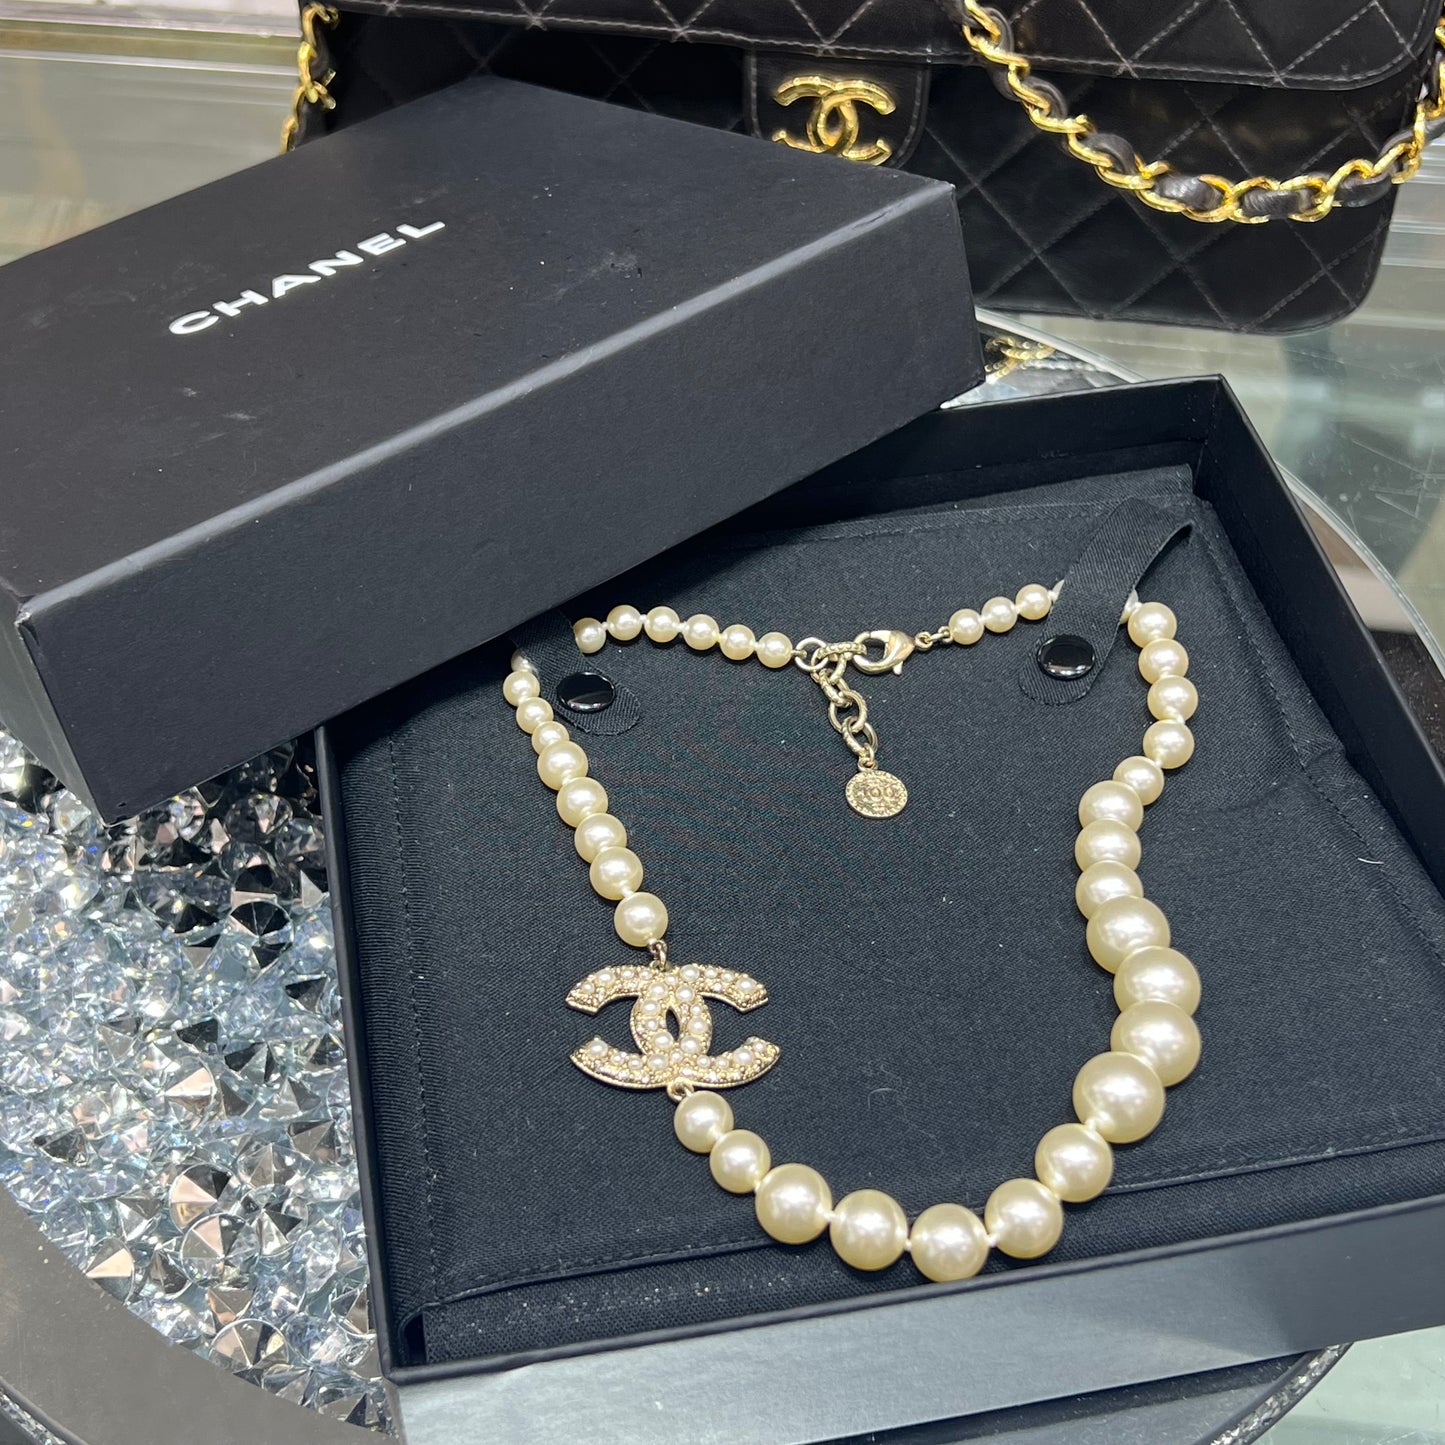 Chanel Pearl CC Short Necklace with Box